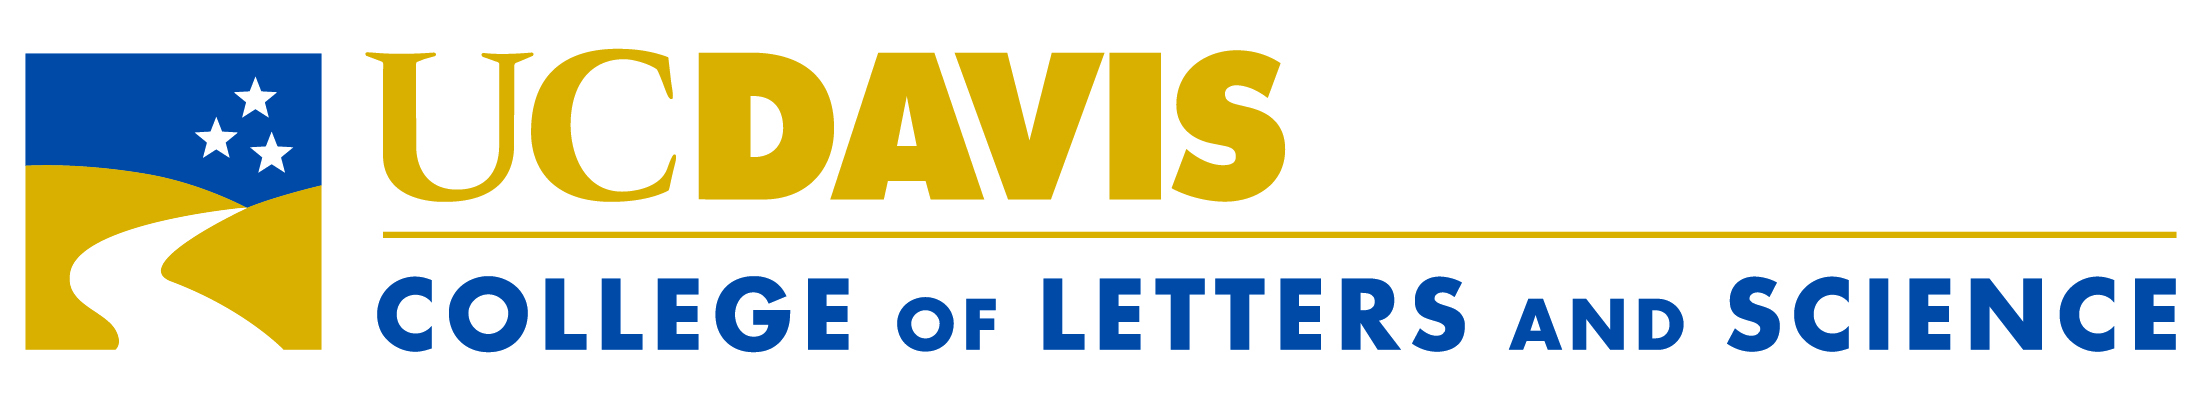 UC Davis College of Letters and Science logo